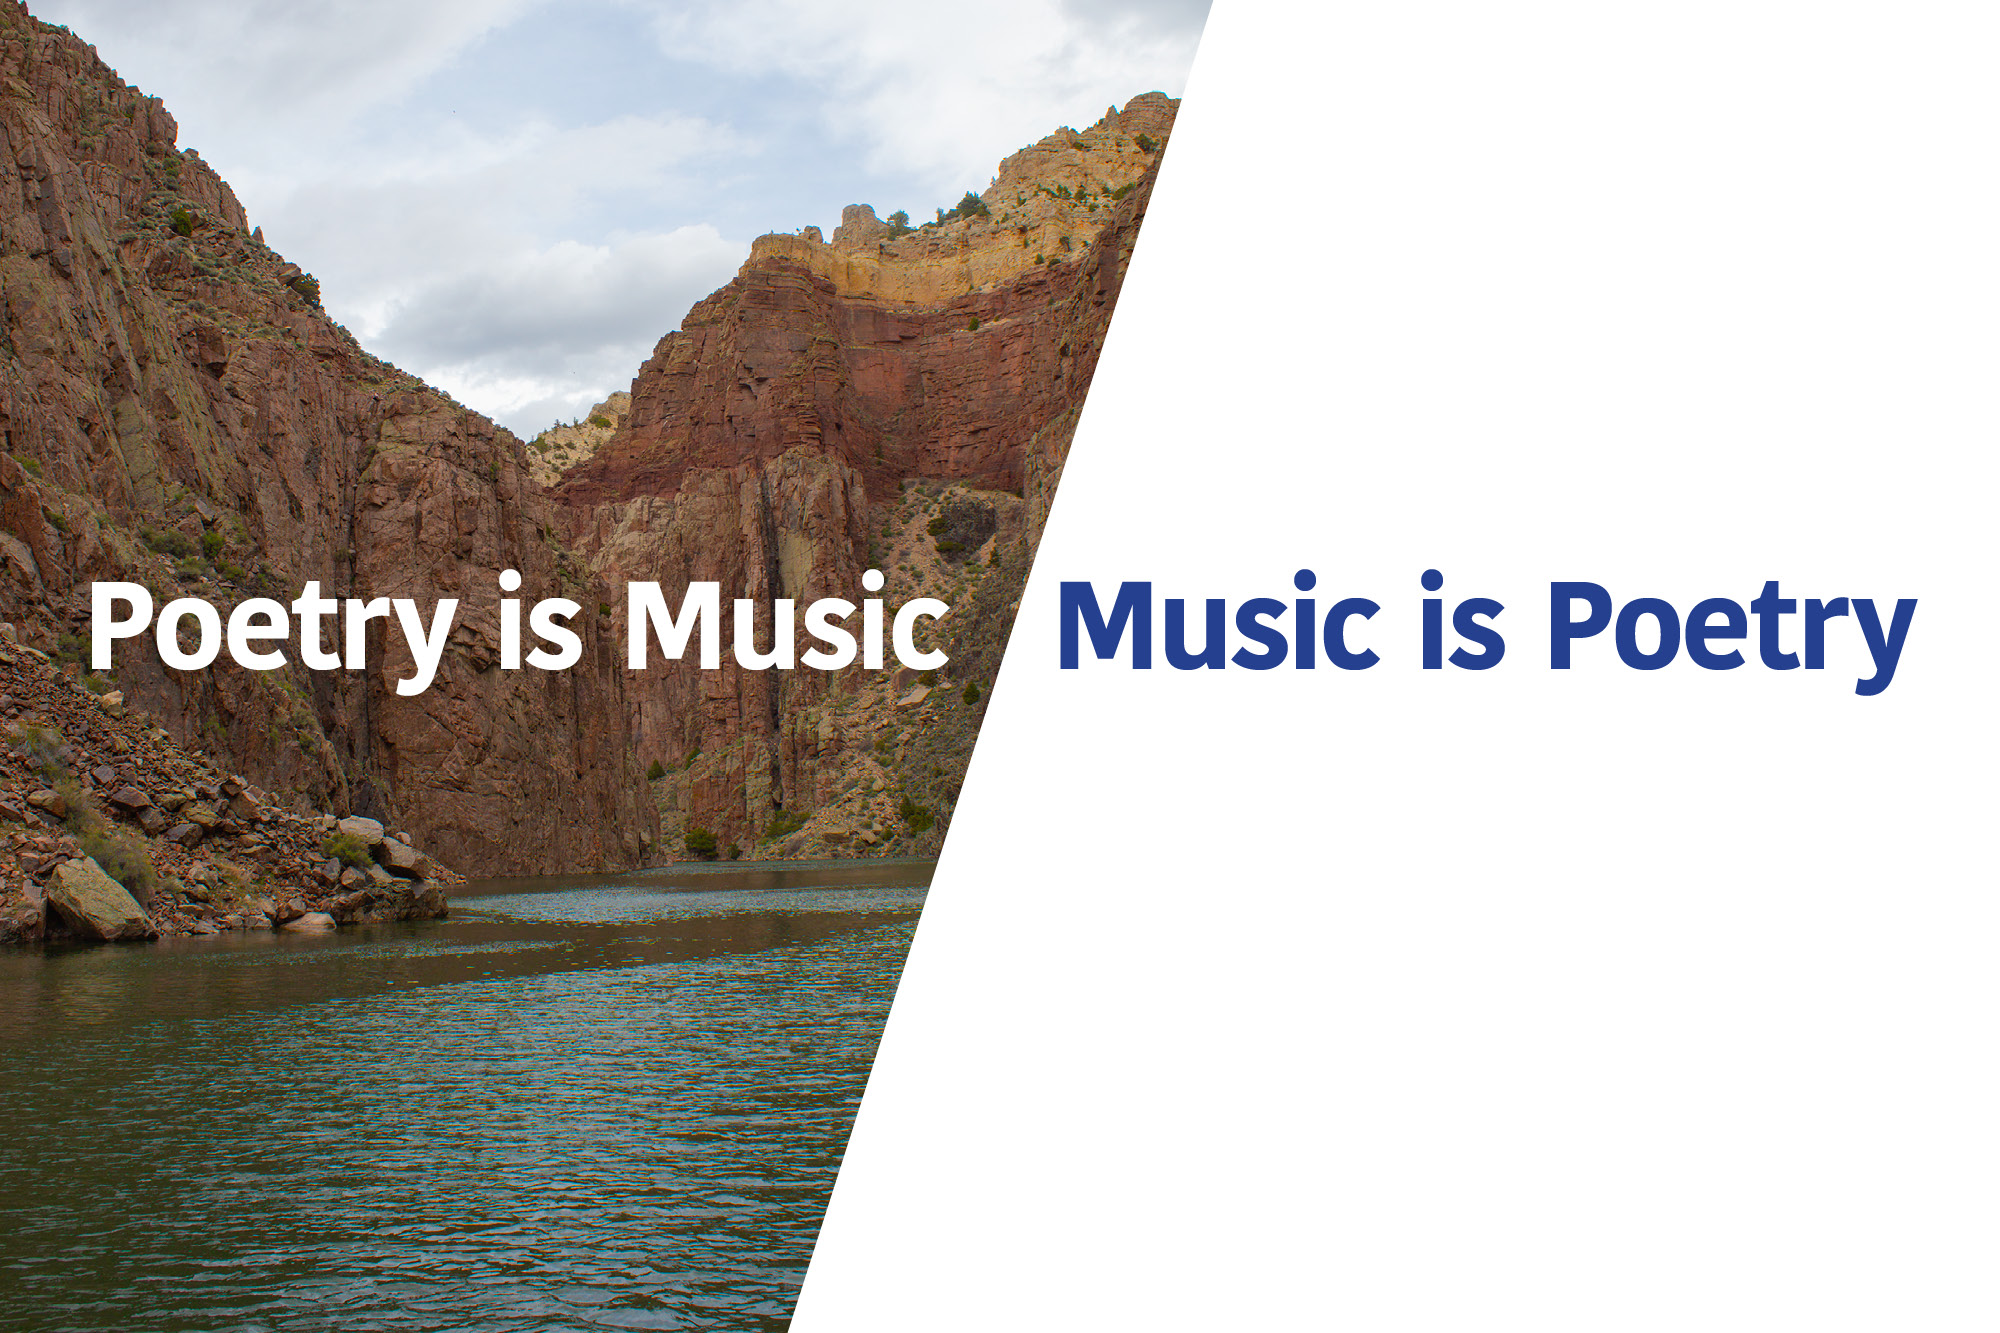 Image for "Poetry is Music/Music is Poetry" event.